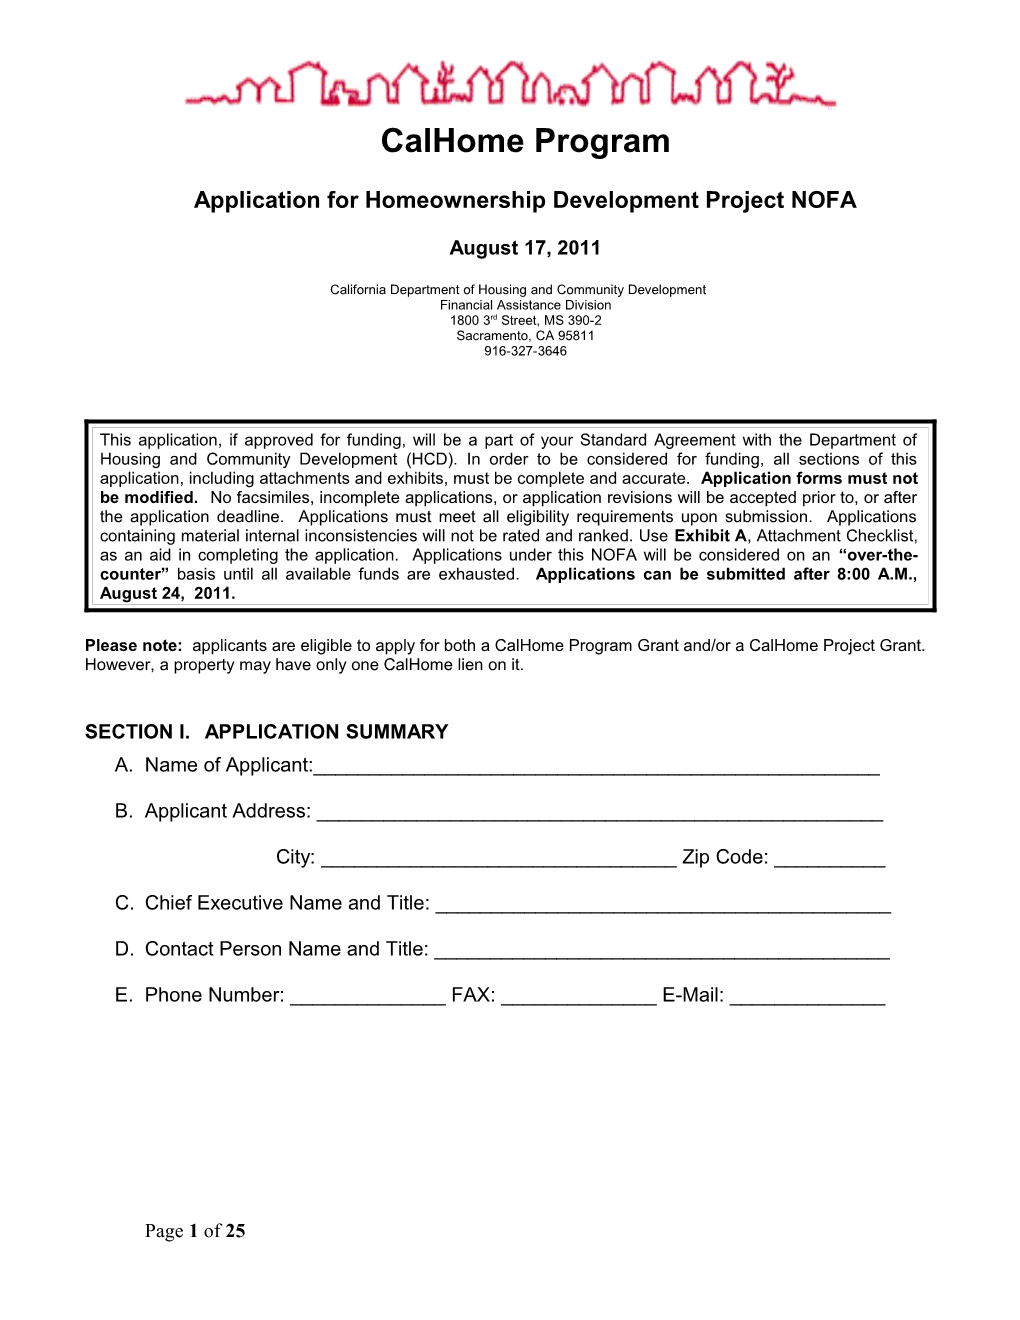 Application for Homeownership Development Project NOFA